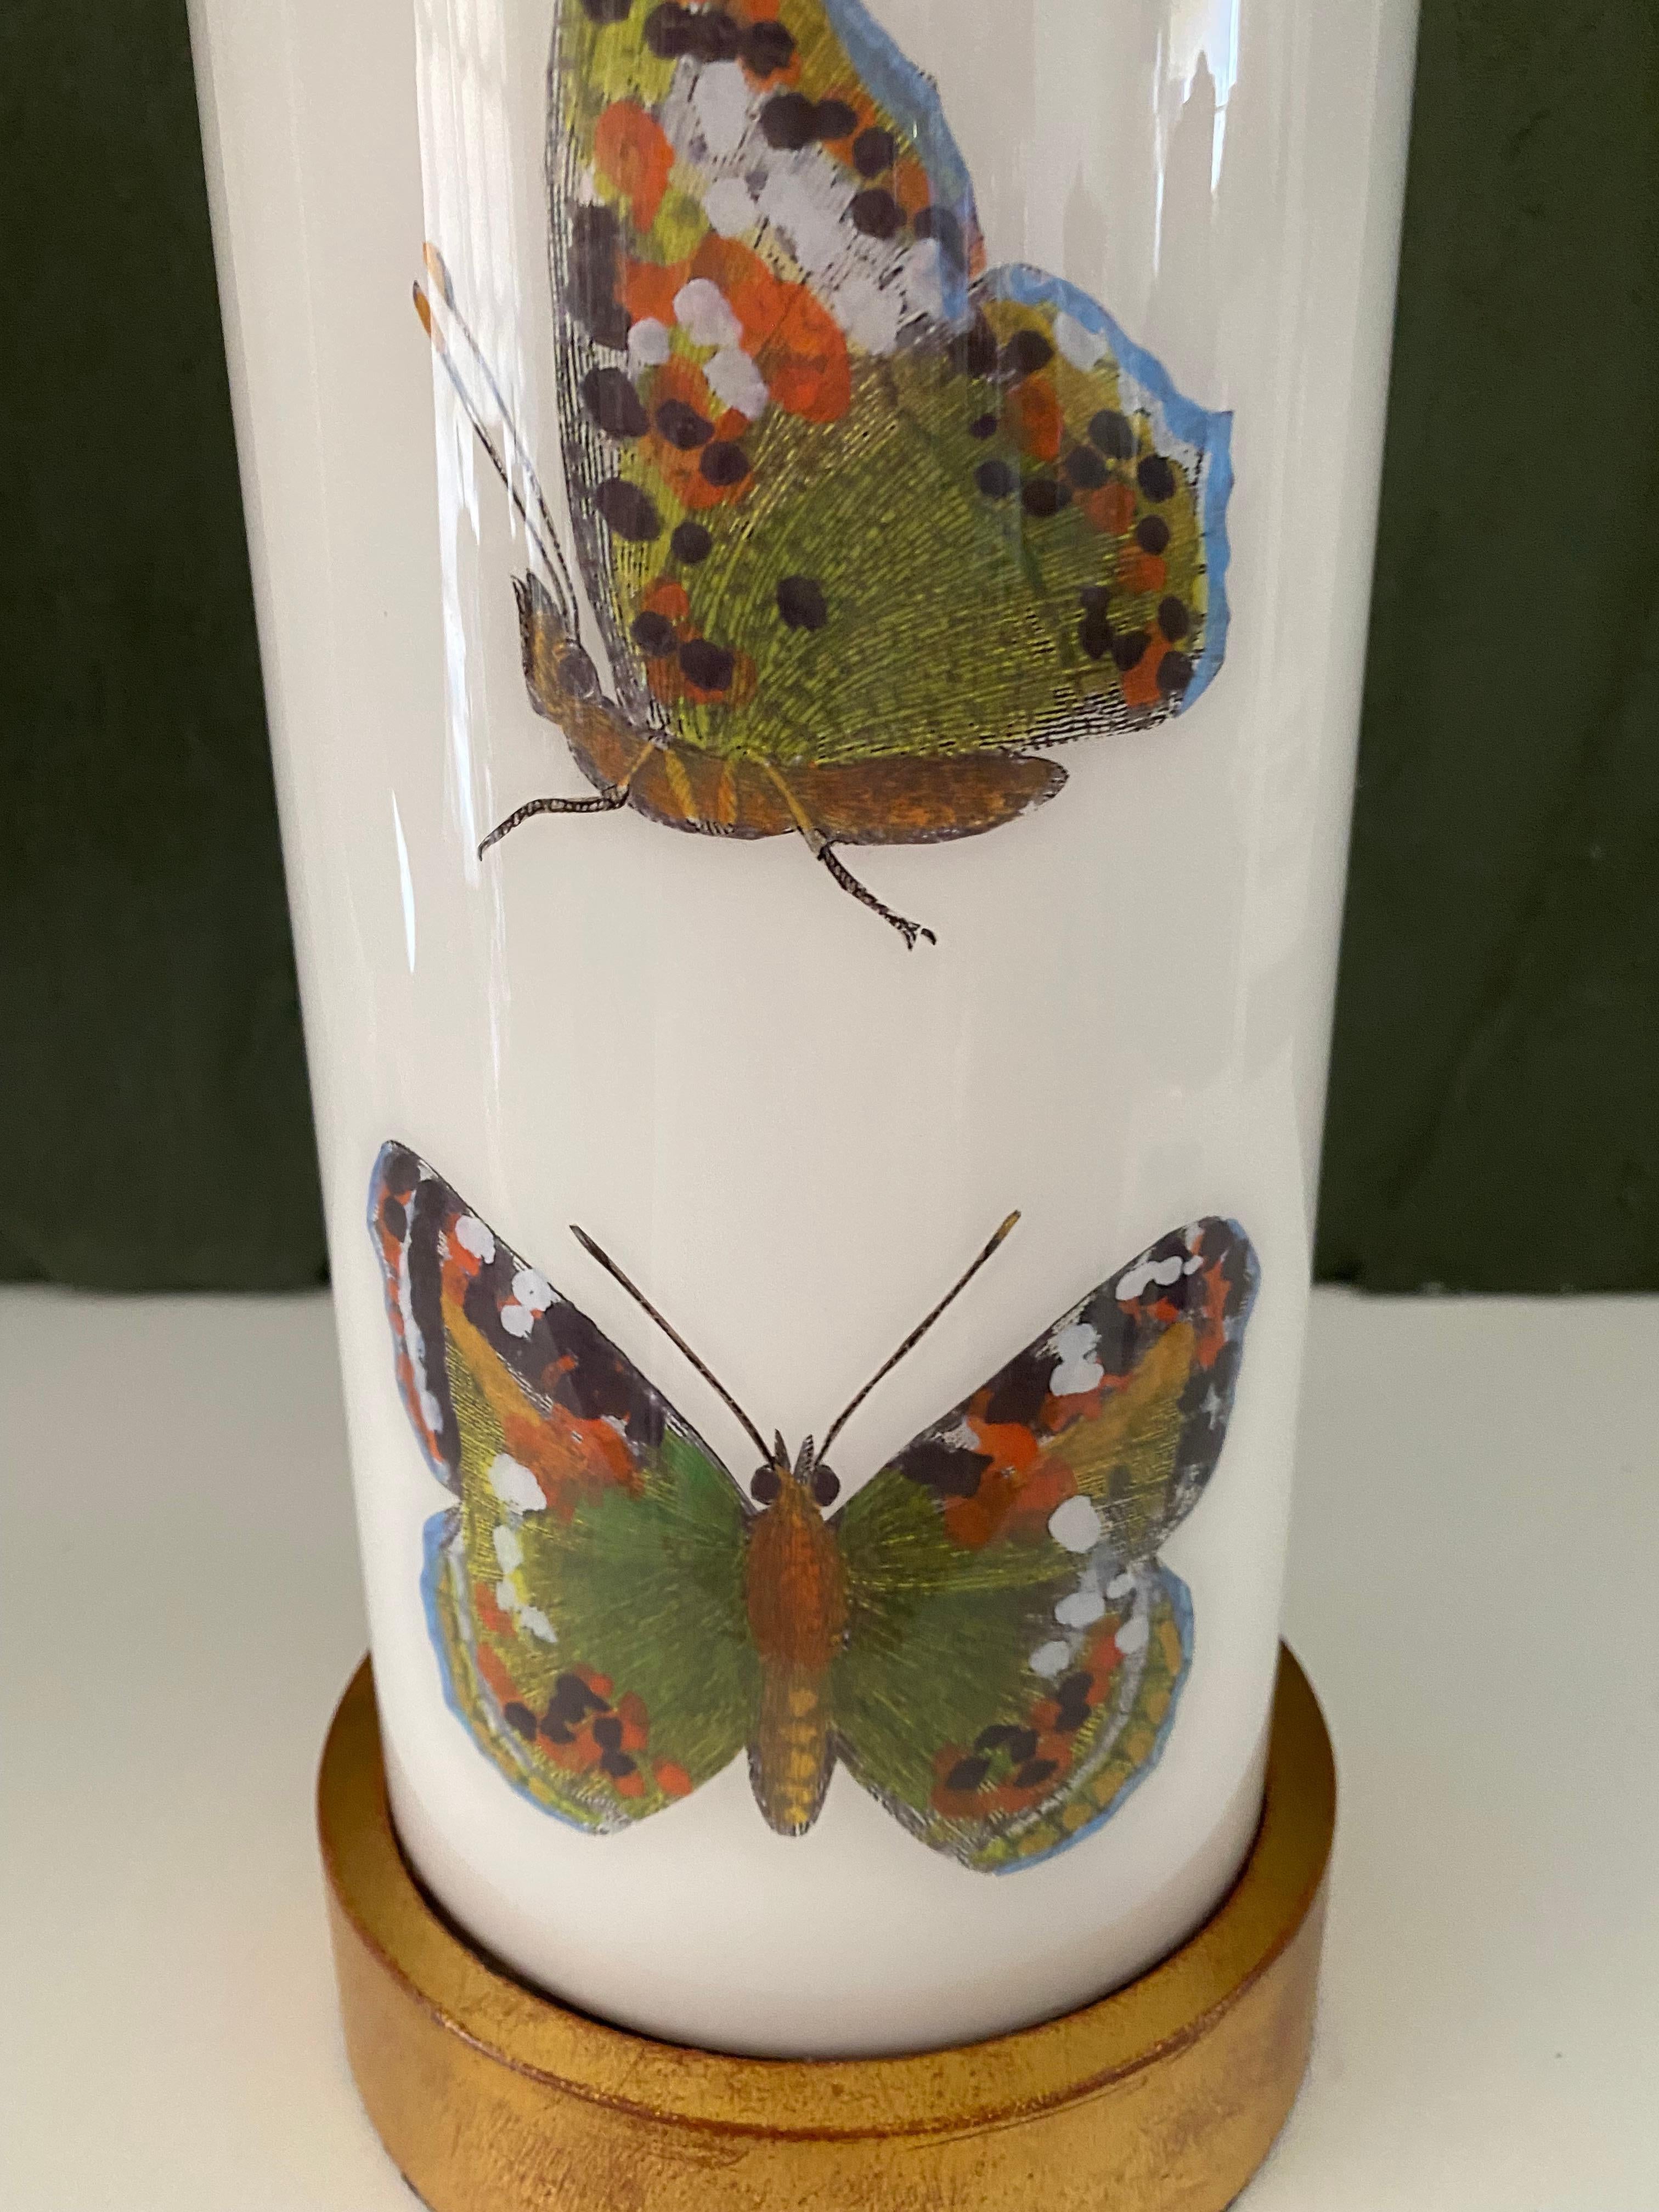 Hand made with care in Houston, Texas. This glass lamp features a selection of 18th century hand-colored engravings of beautiful butterflies in green hues against a soft white background, with hand-turned lightly distressed, gilt wood base and cap